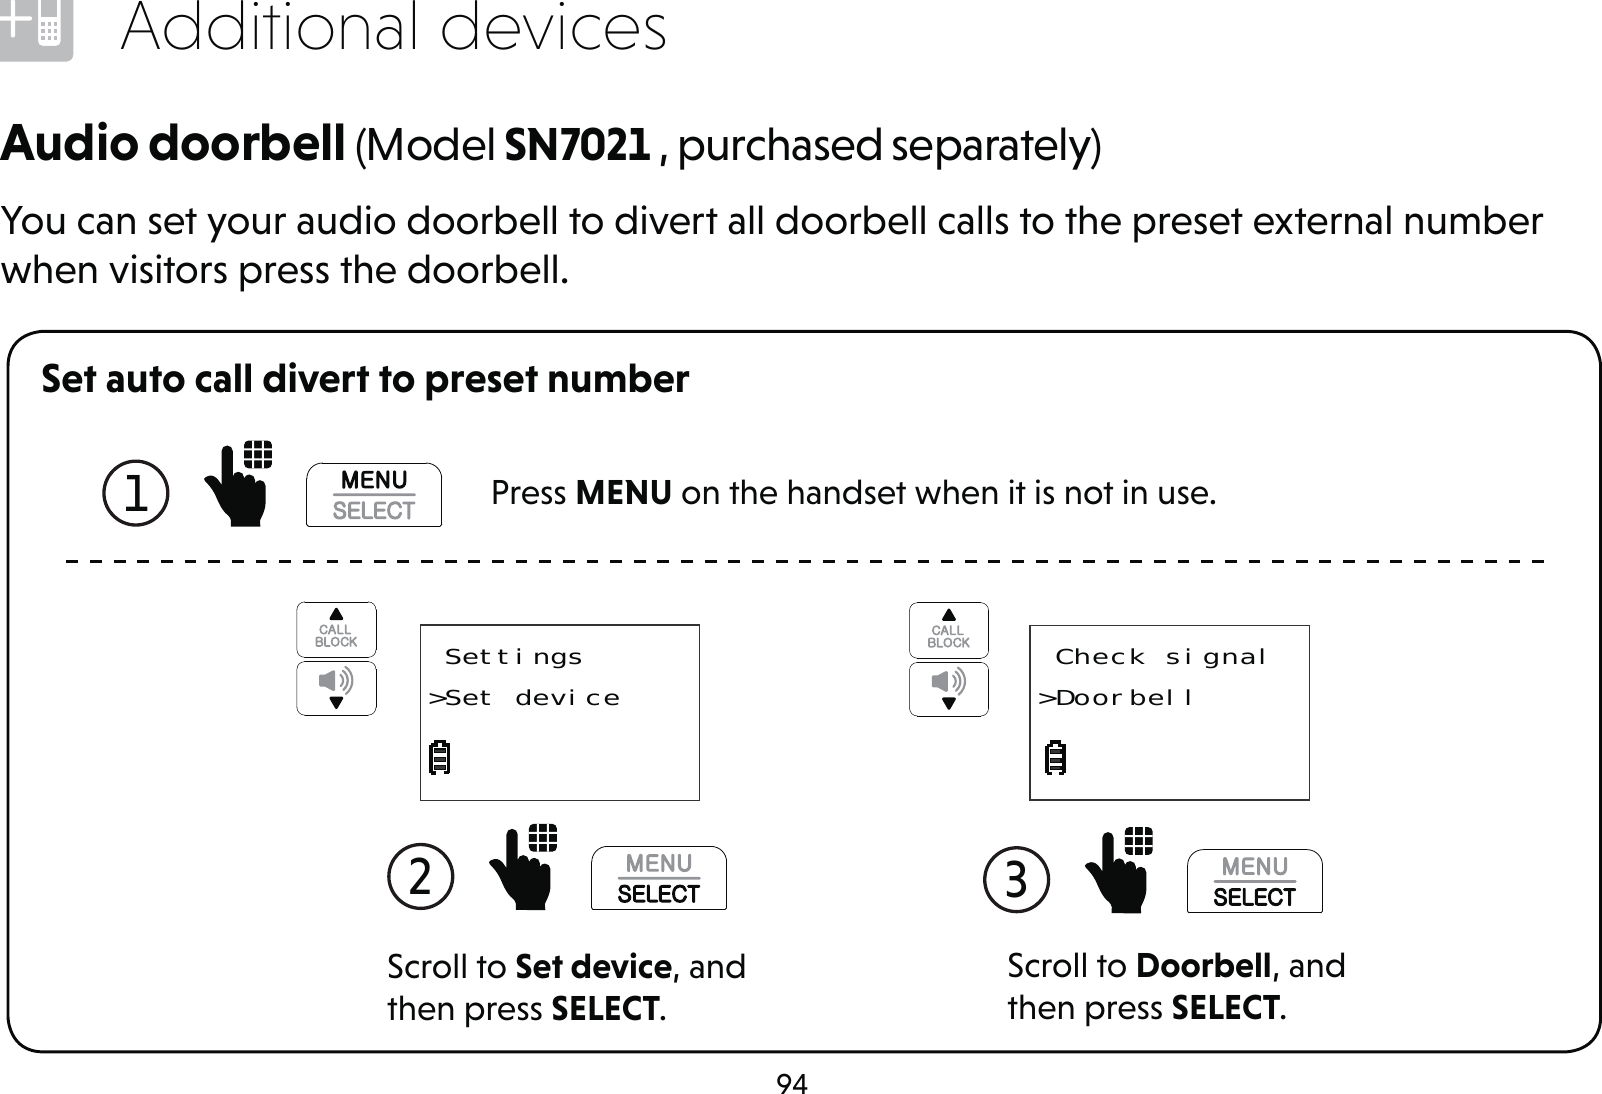 94Additional devicesSet auto call divert to preset numberScroll to Doorbell, and then press SELECT.3   Check signal&gt;DoorbellScroll to Set device, and then press SELECT.2   Settings&gt;Set deviceAudio doorbell (Model SN7021 , purchased separately)You can set your audio doorbell to divert all doorbell calls to the preset external number when visitors press the doorbell.1   Press MENU on the handset when it is not in use.